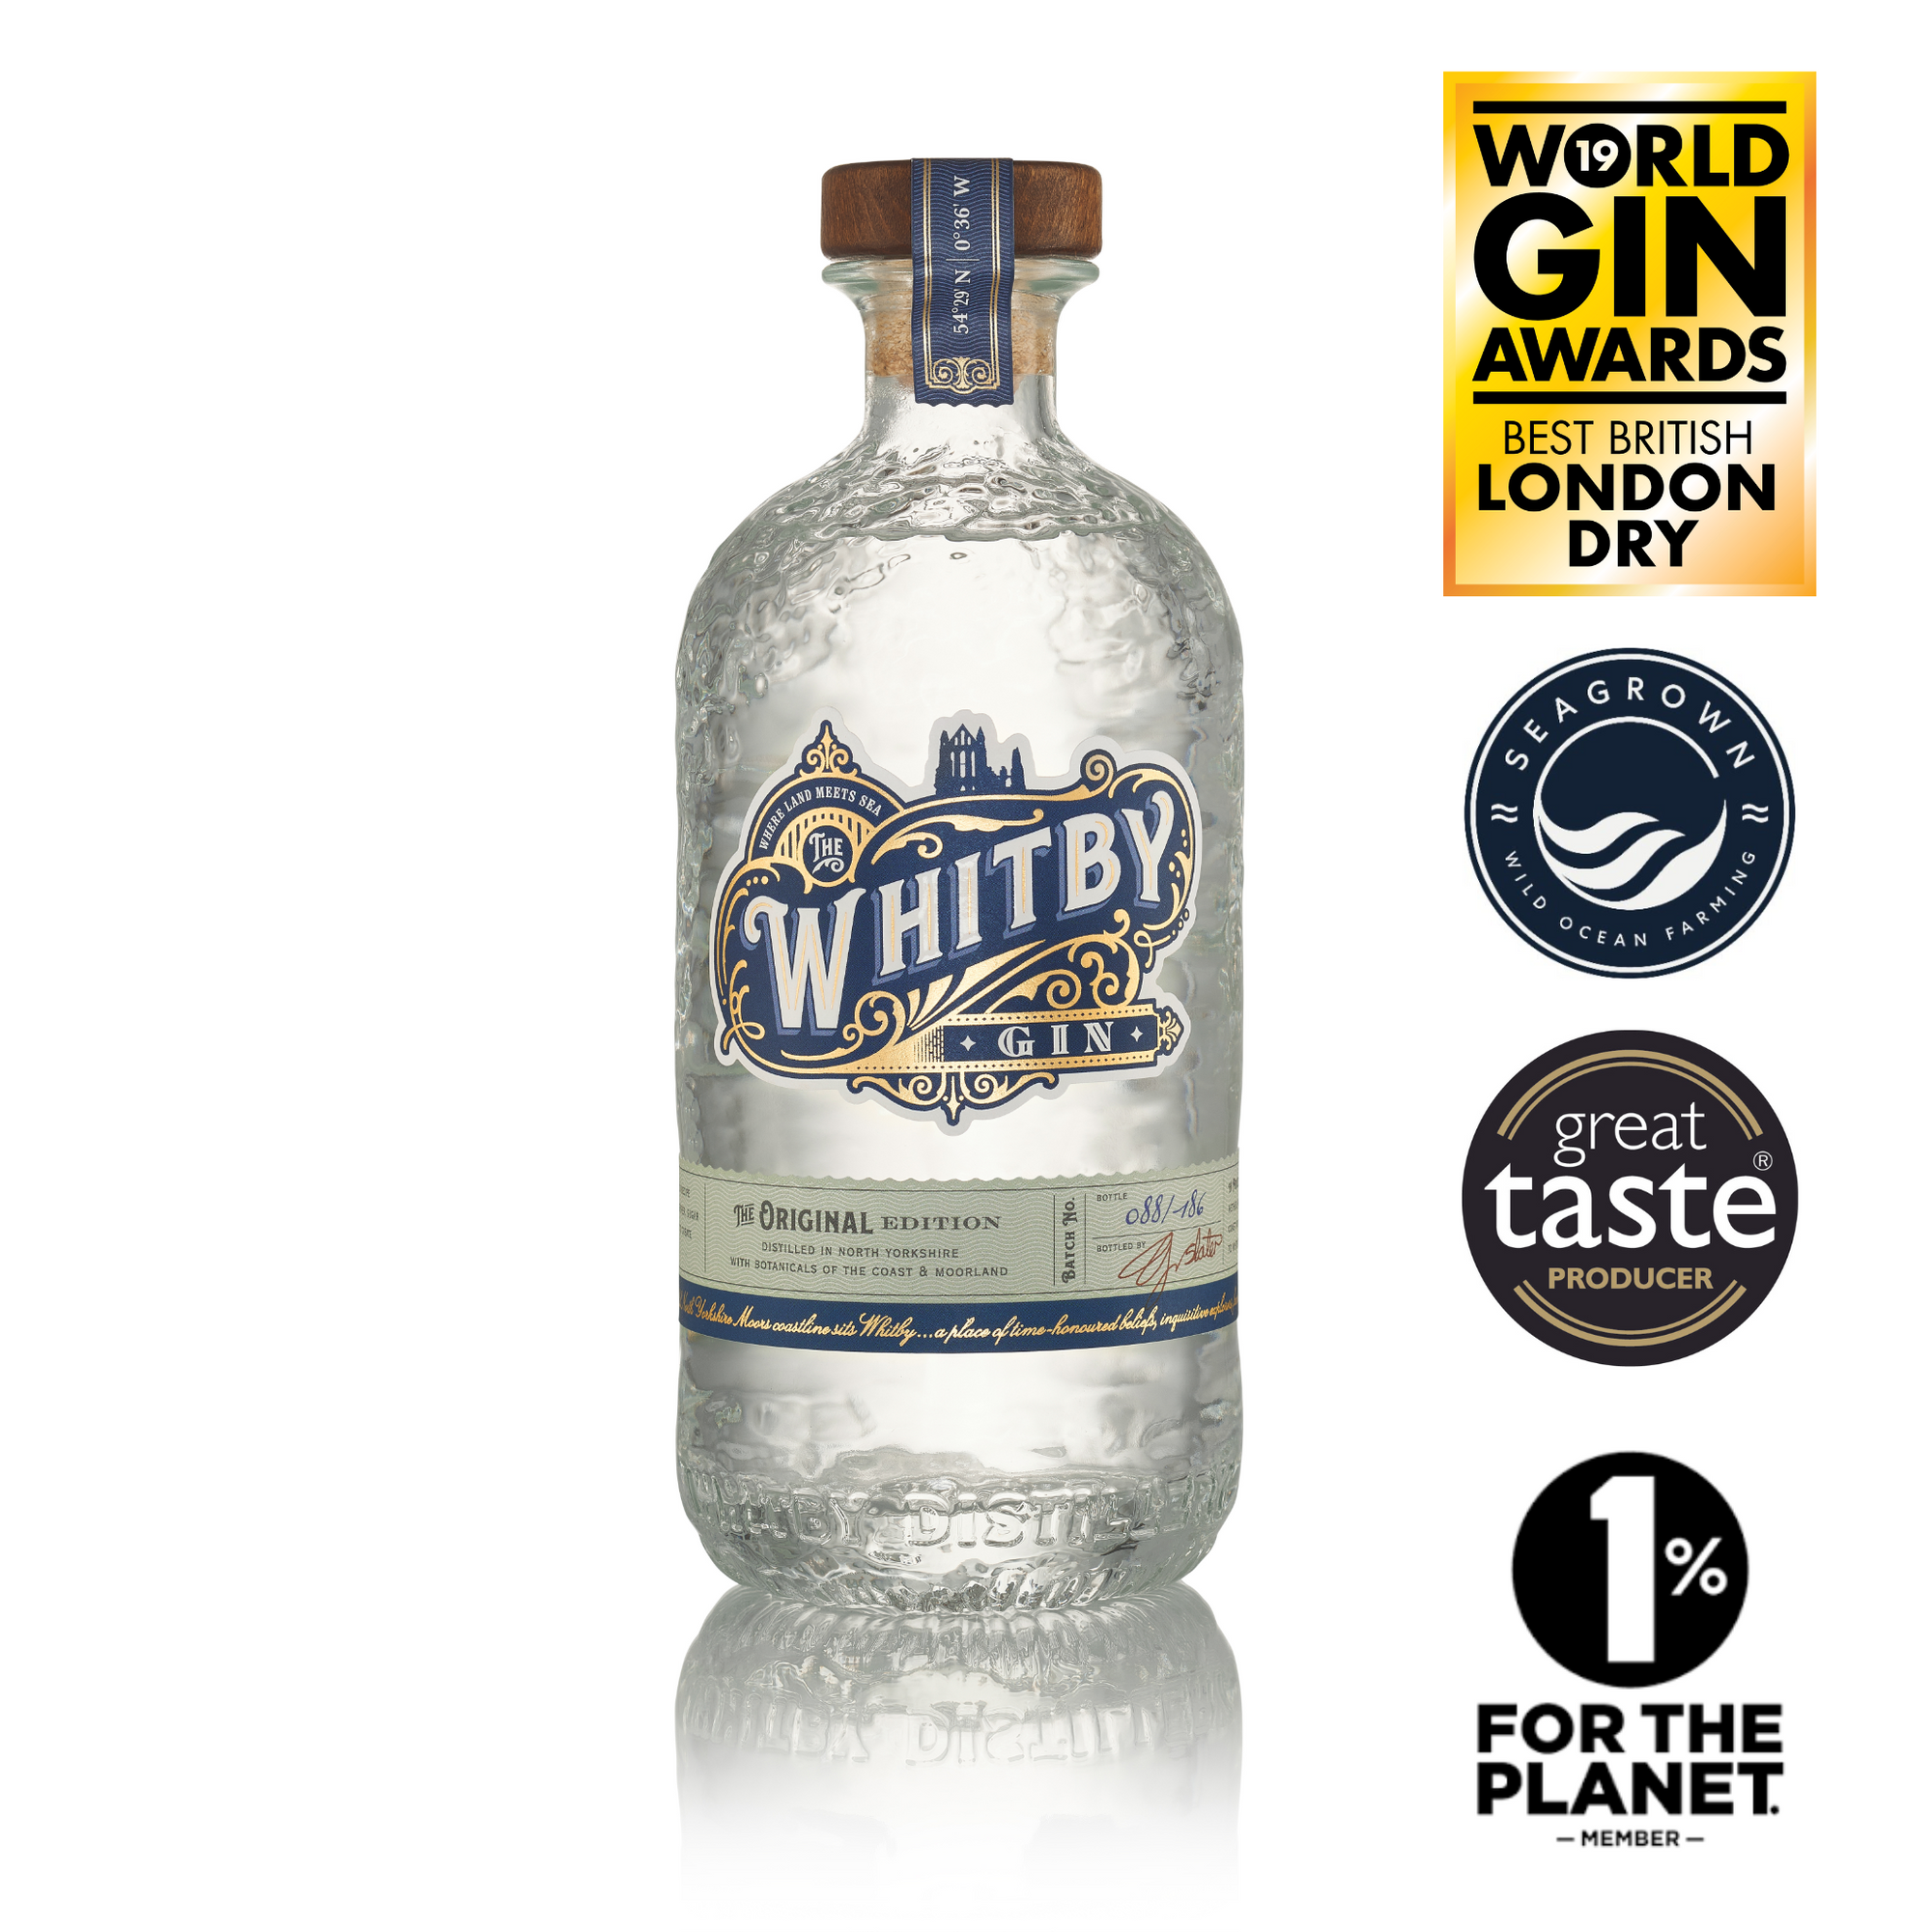 Whitby Gin - Original Edition